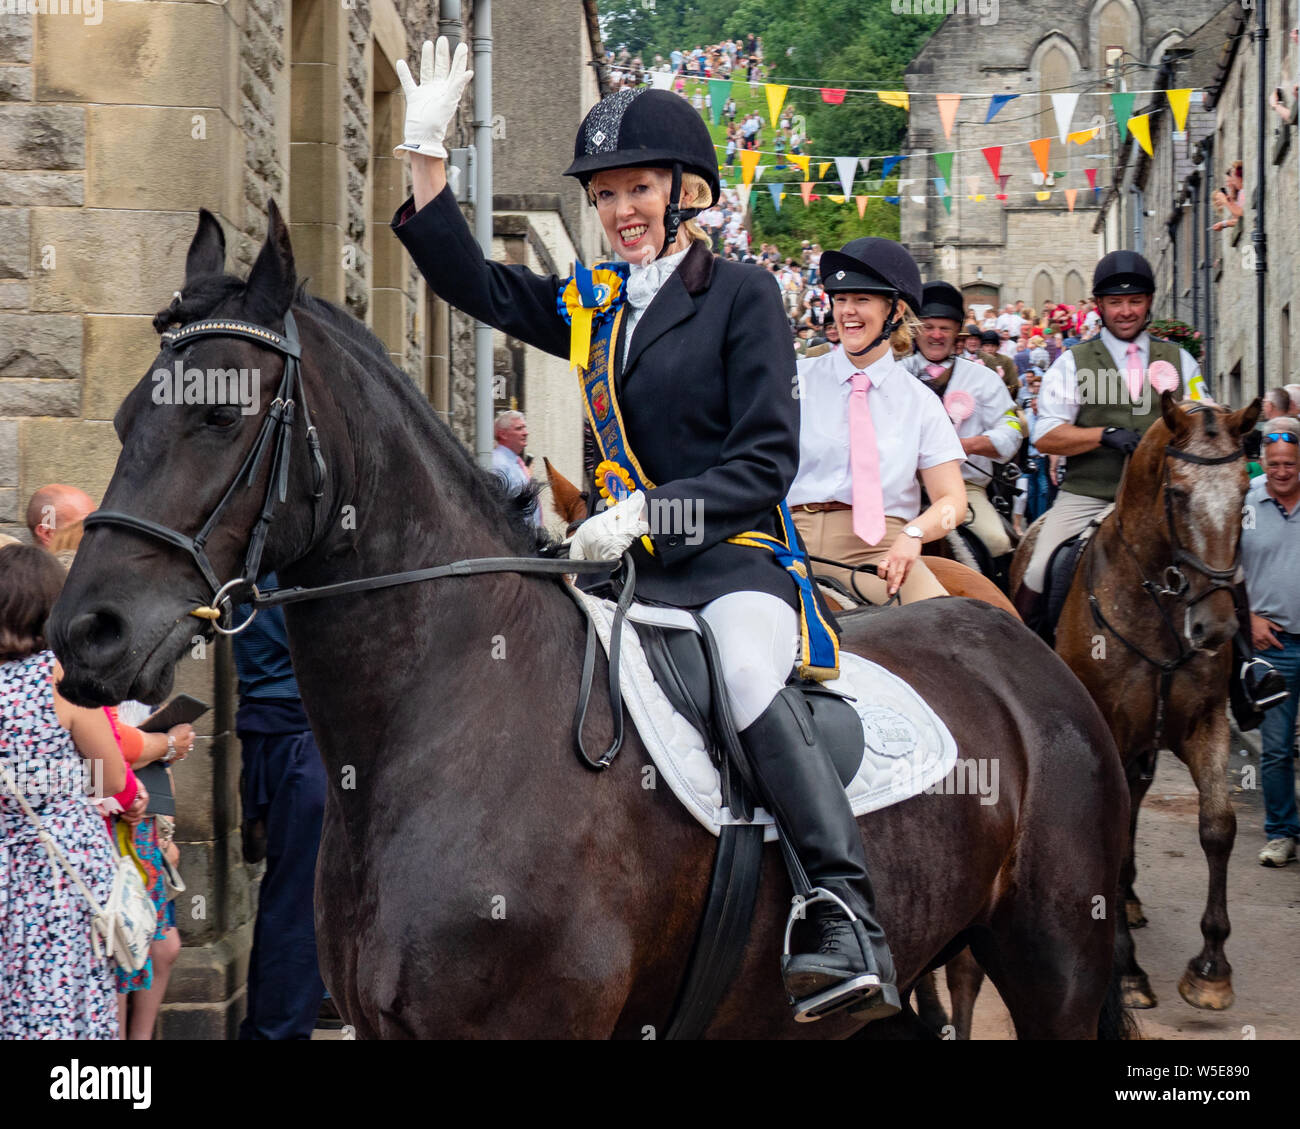 Langholm, Dumfries and Galloway, Scotland, UK. 26th July 2019. The Langholm Common Riding, annual event that takes place on the last Friday of July. Stock Photo